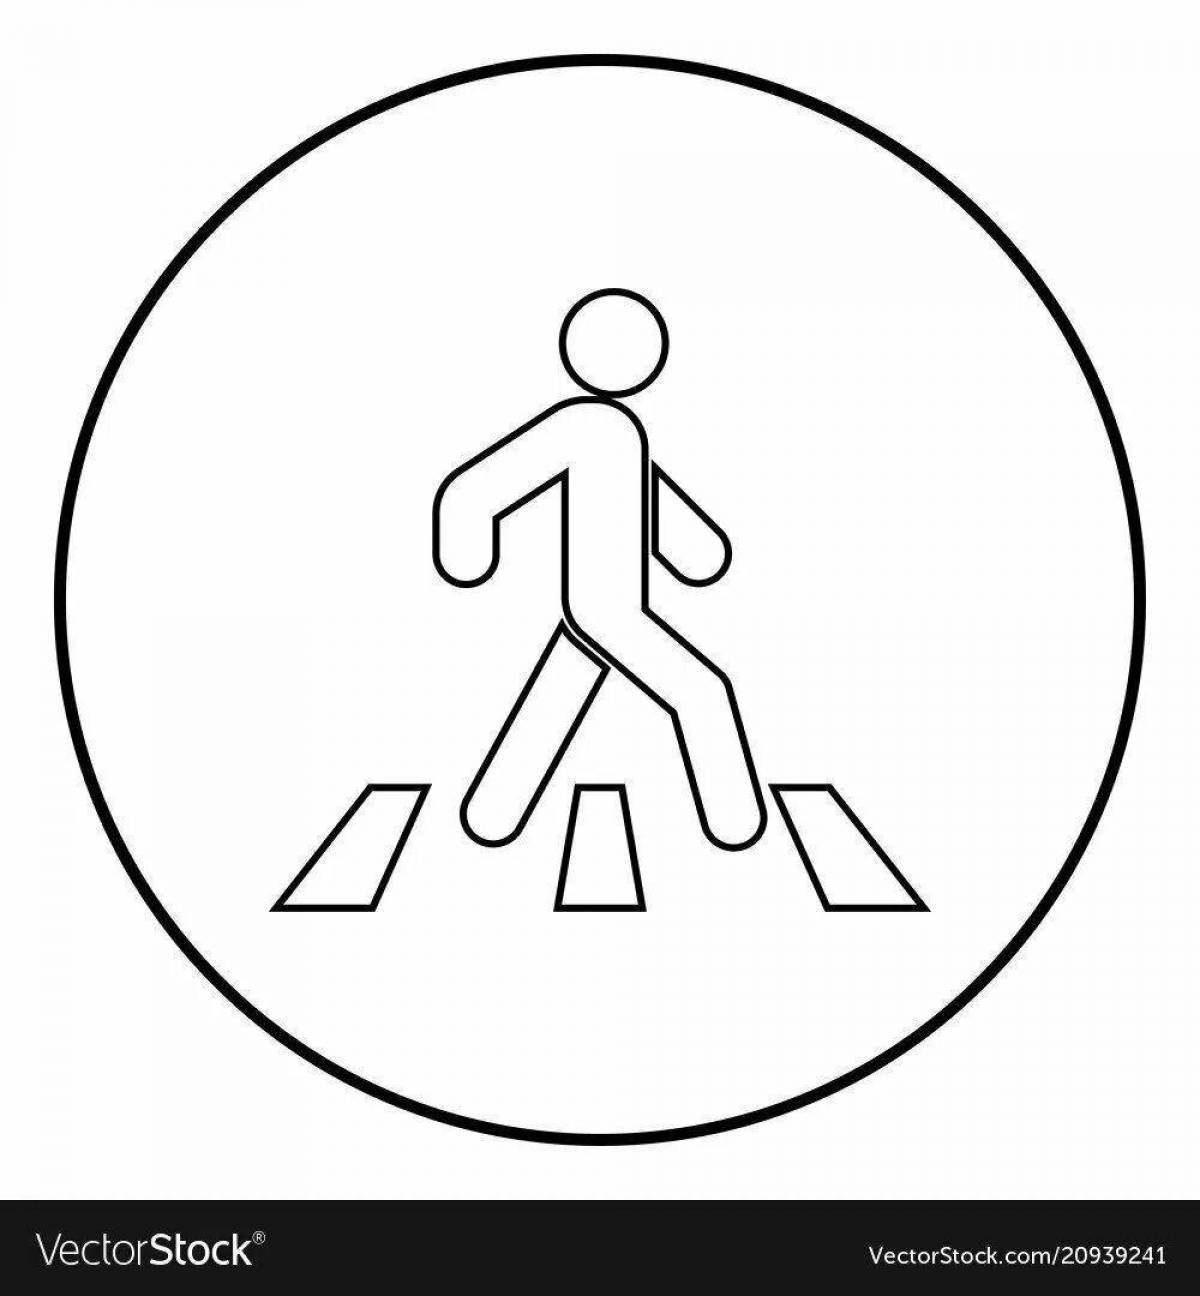 Coloring page exciting pedestrian signs